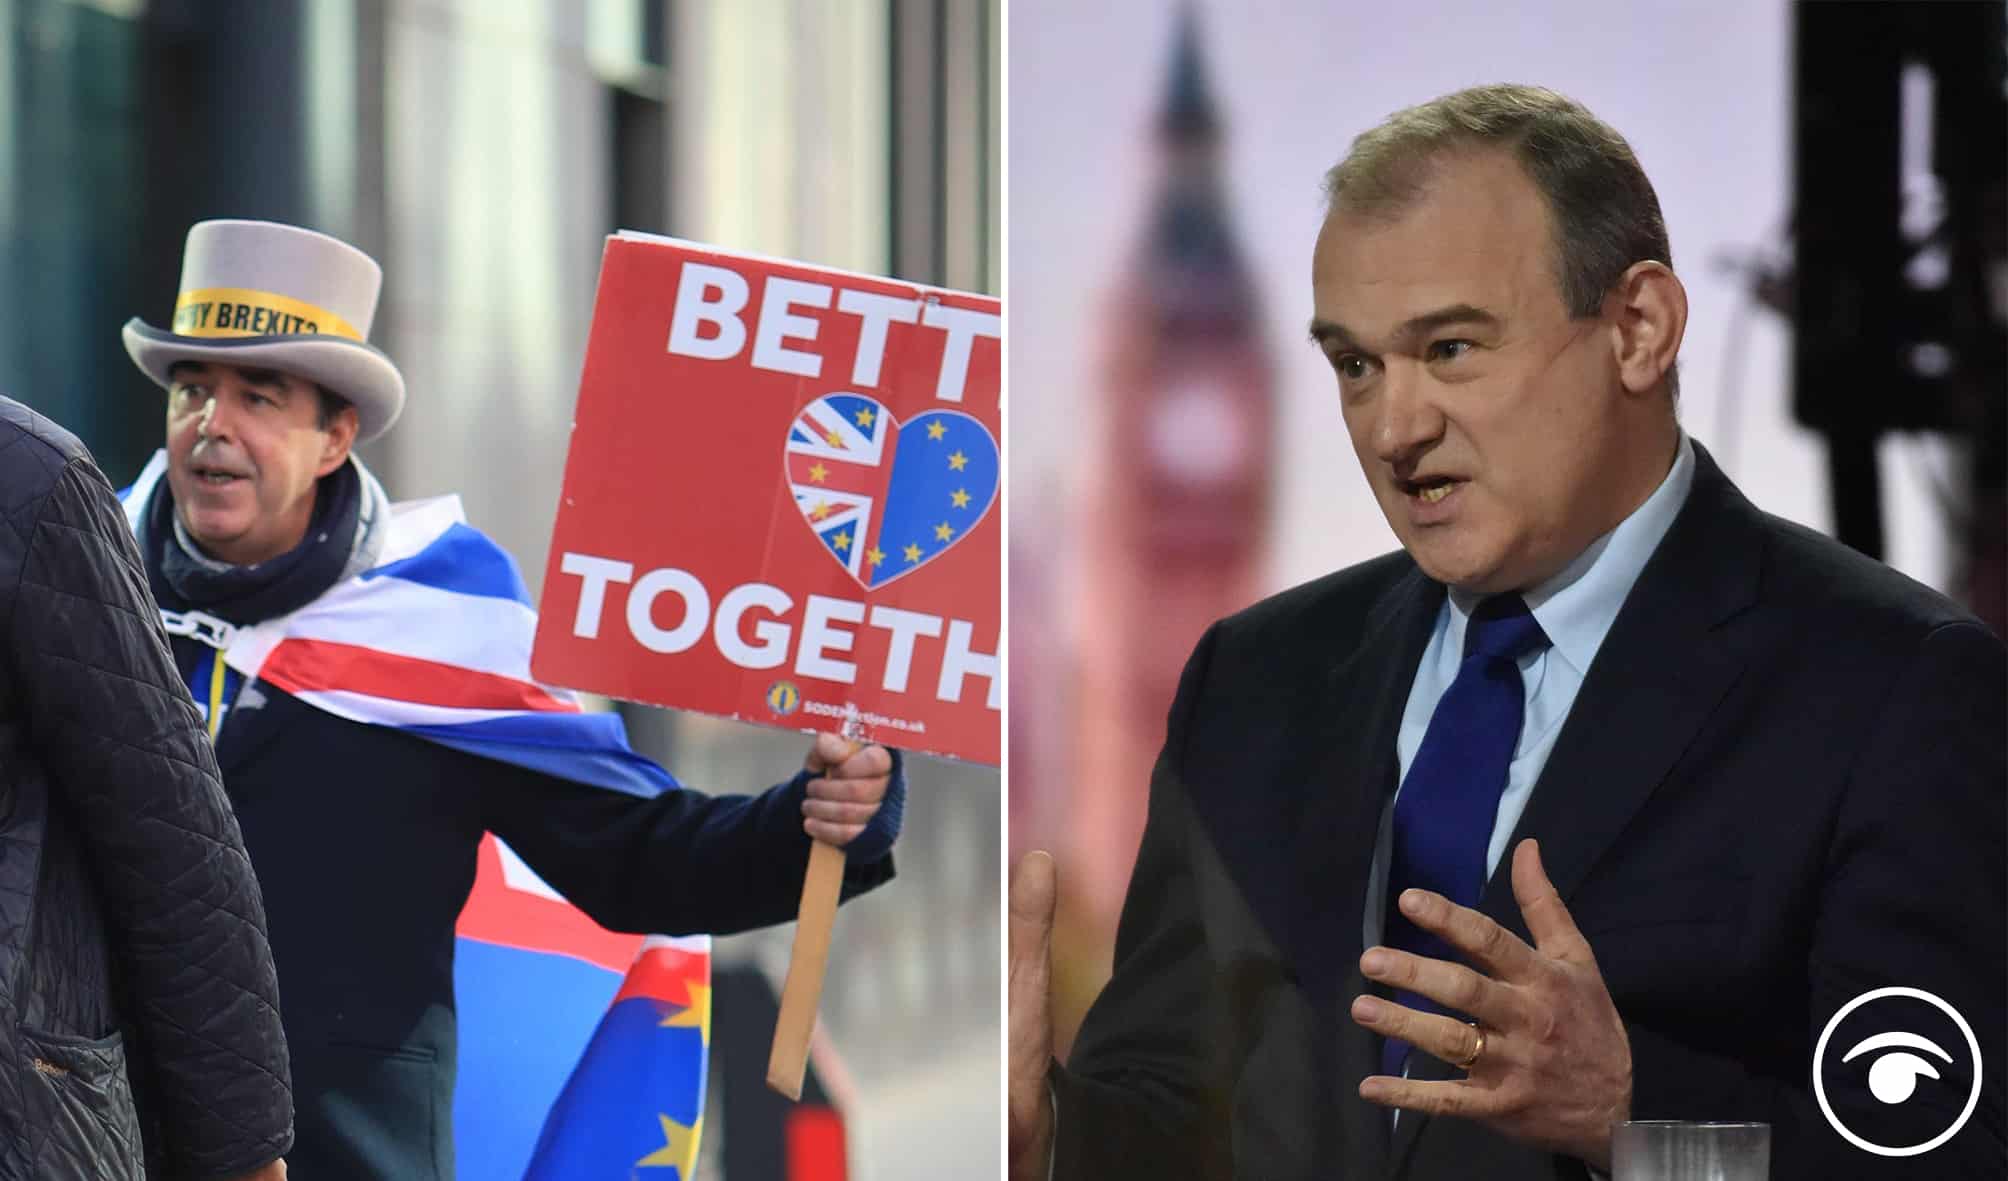 Brexit: Lib Dems are ‘very pro-European’ but ‘not a rejoin party’ – Sir Ed Davey